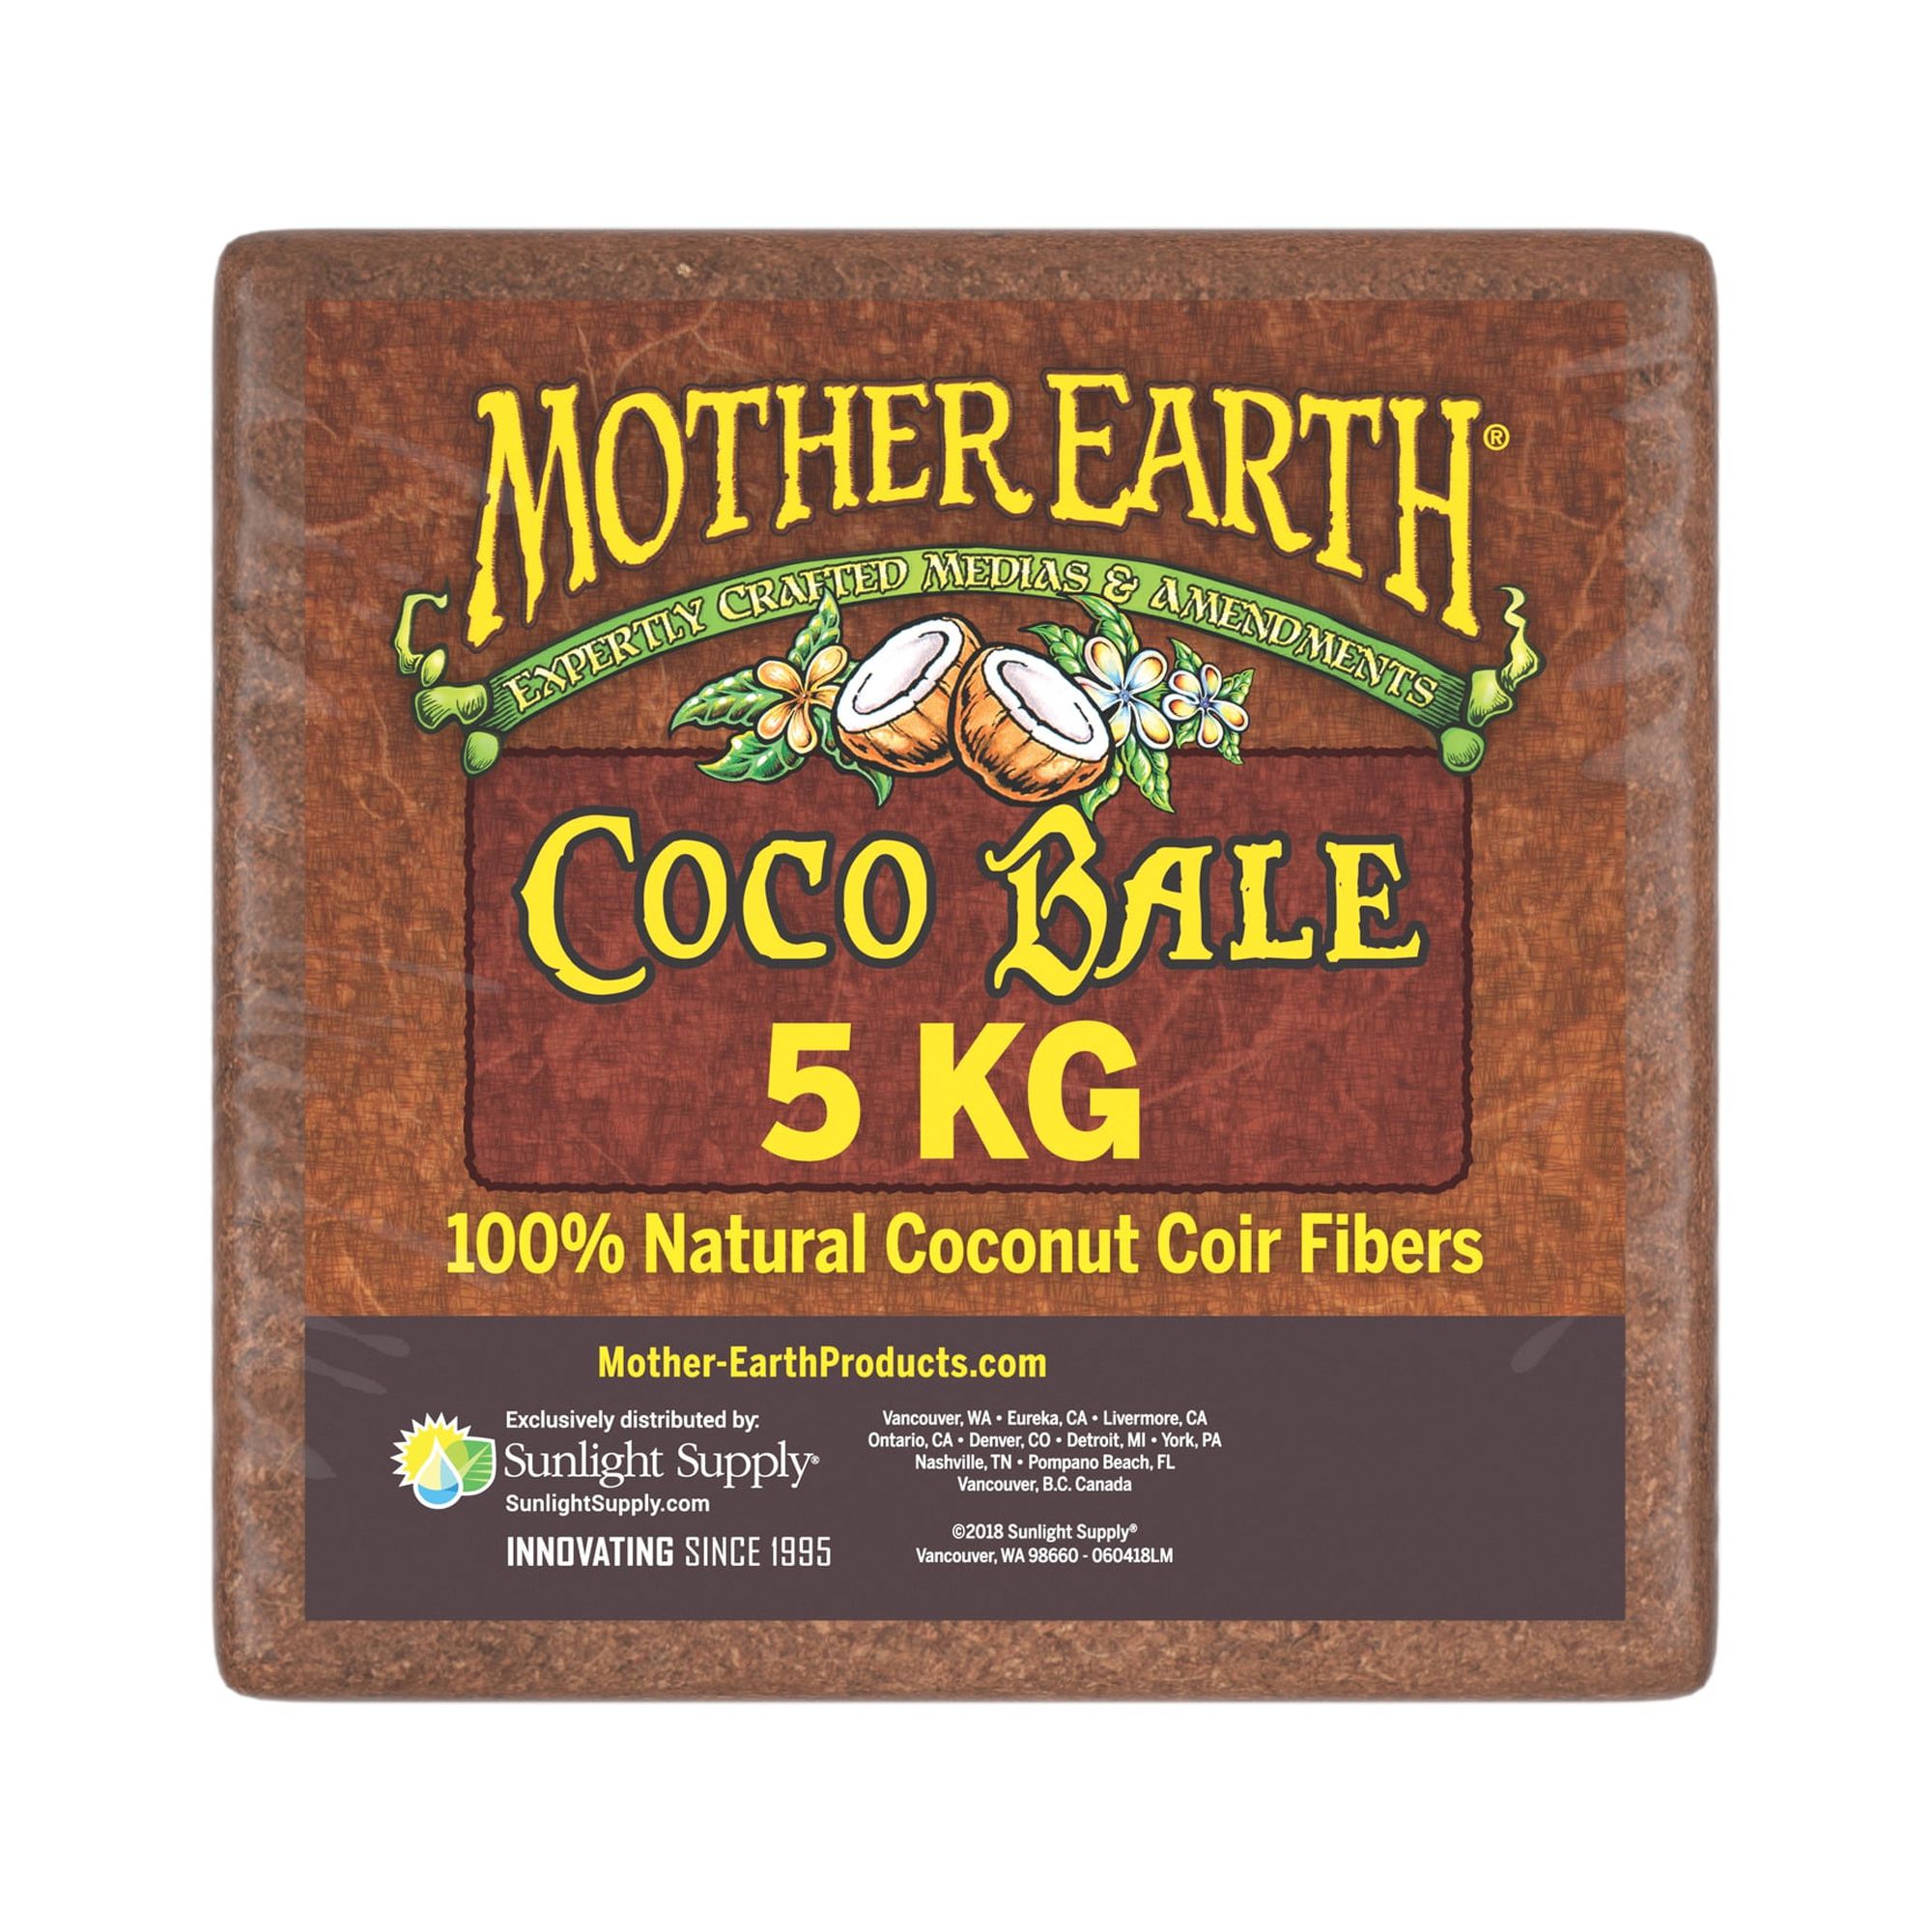 Mother Earth Coco Bale 5 kg, 100% Coconut Coir Fibers - image 1 of 8